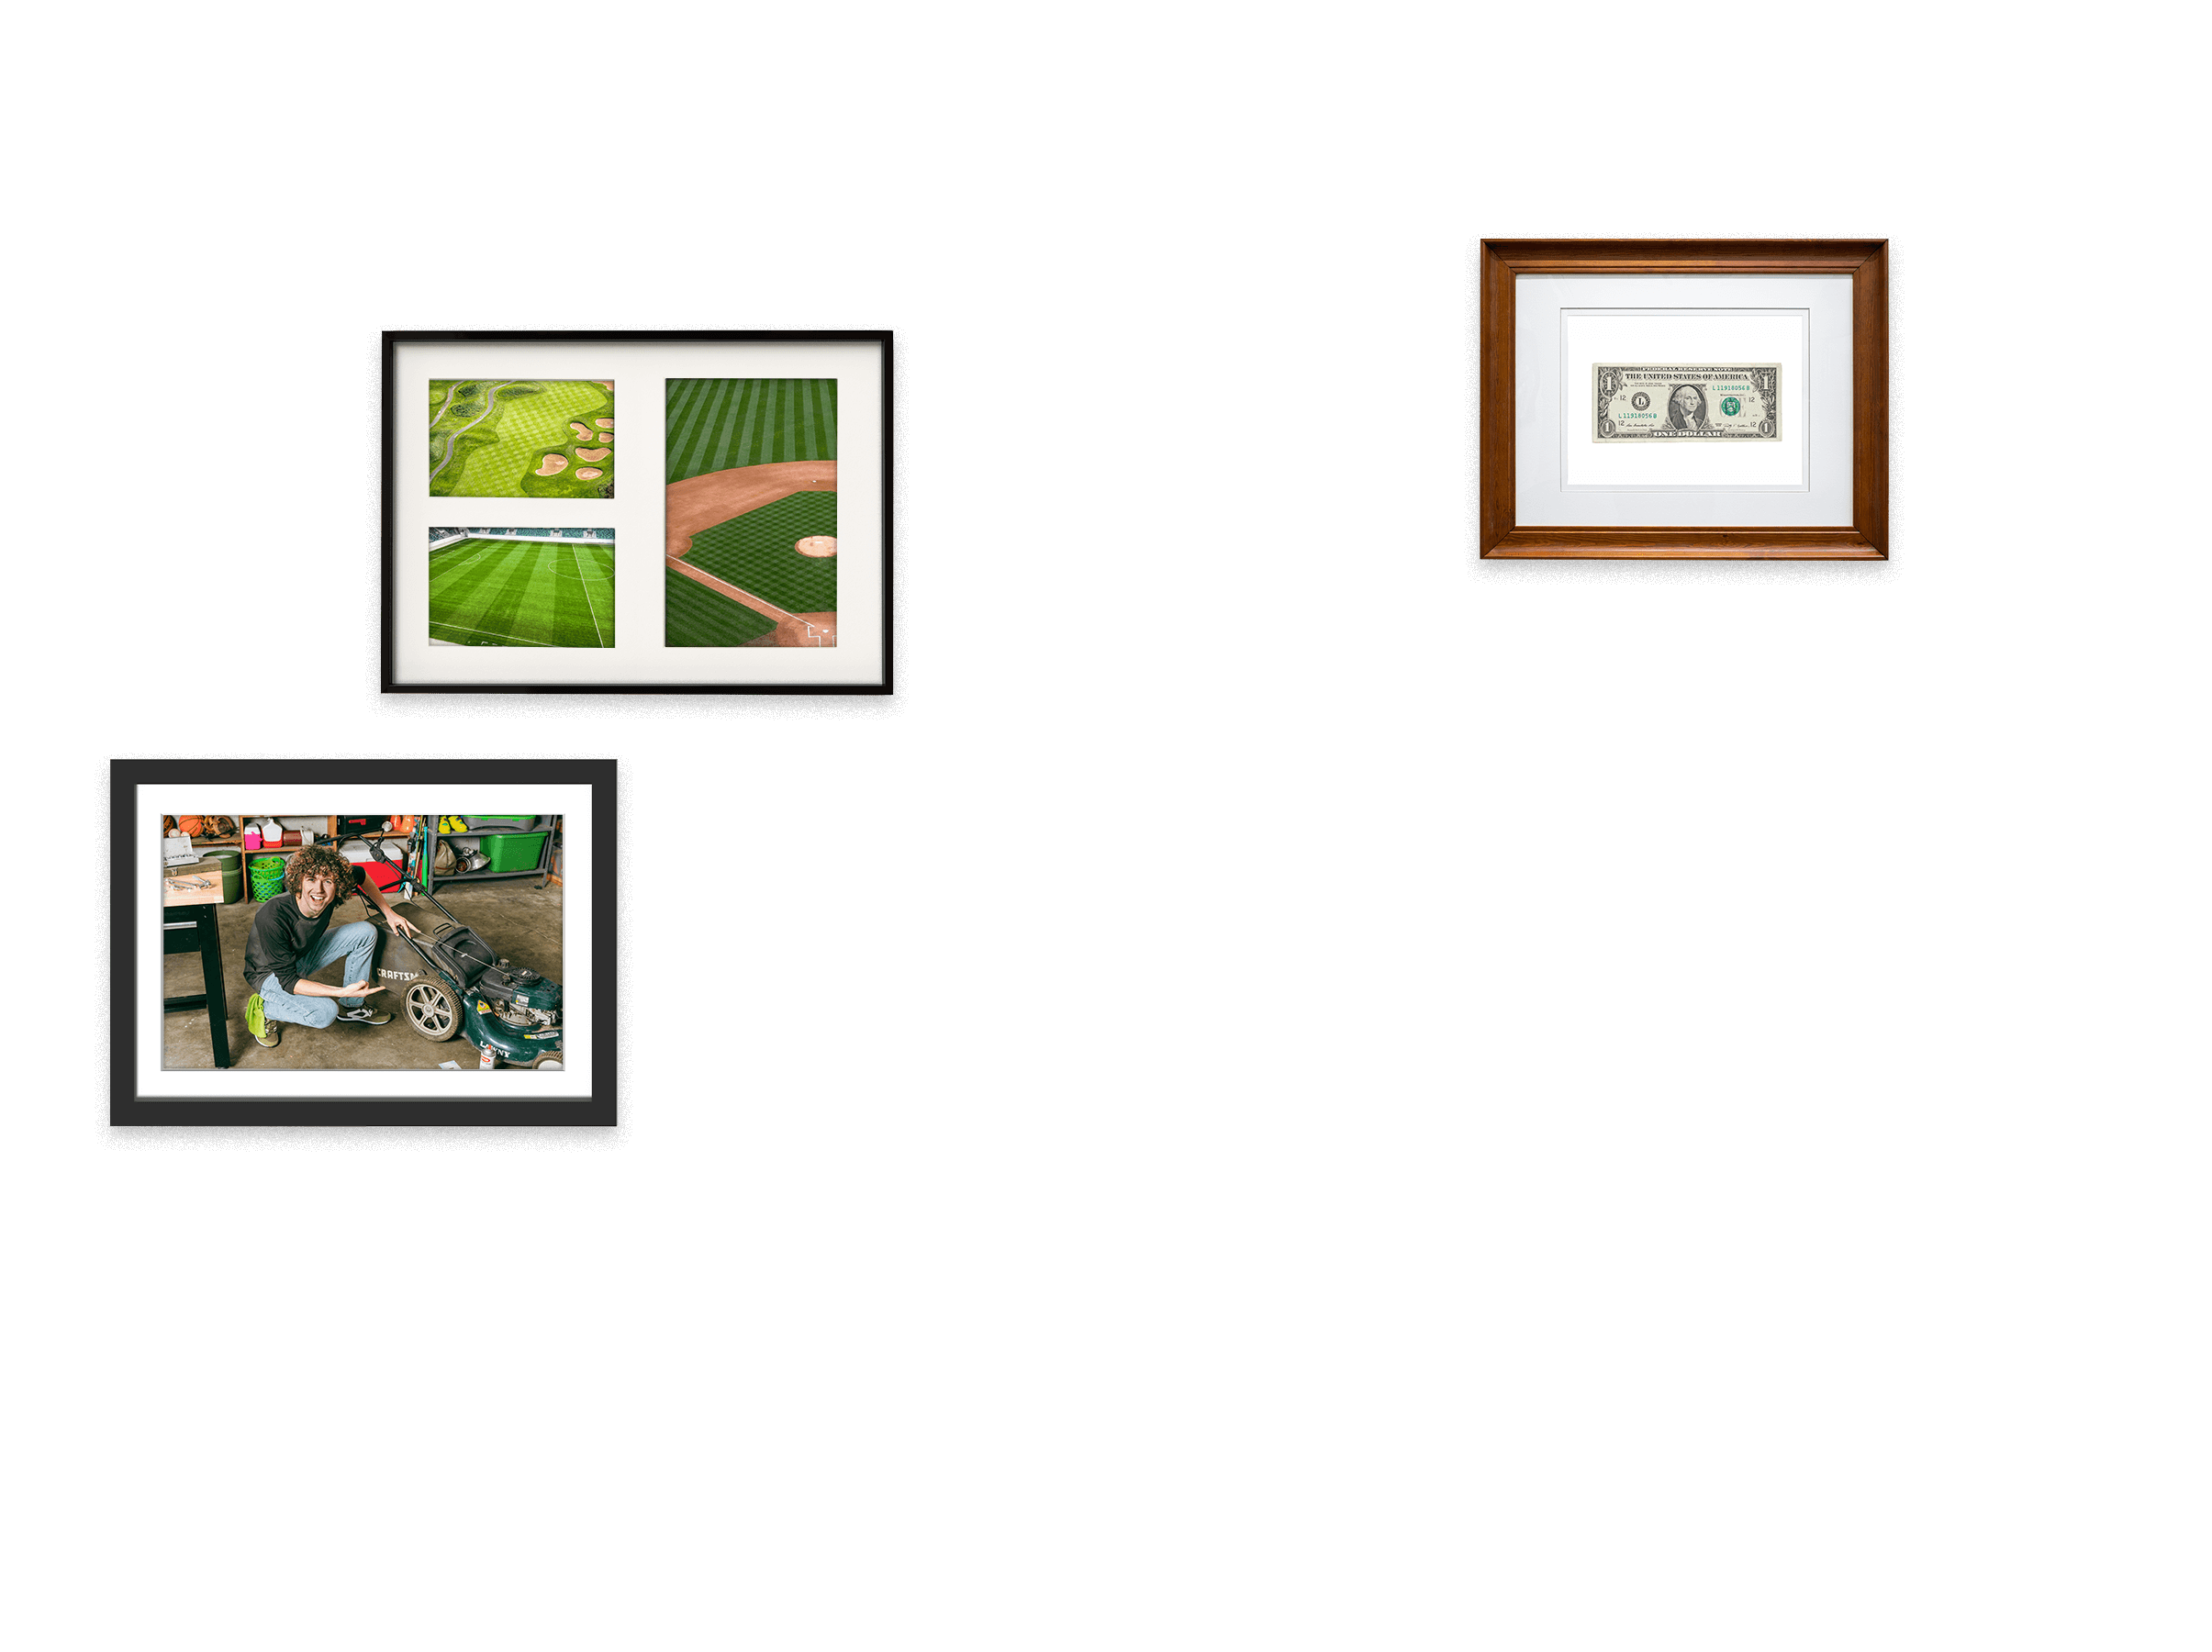 Framed photos of boy with his lawnmower, a golf course, soccer pitch, and baseball stadium